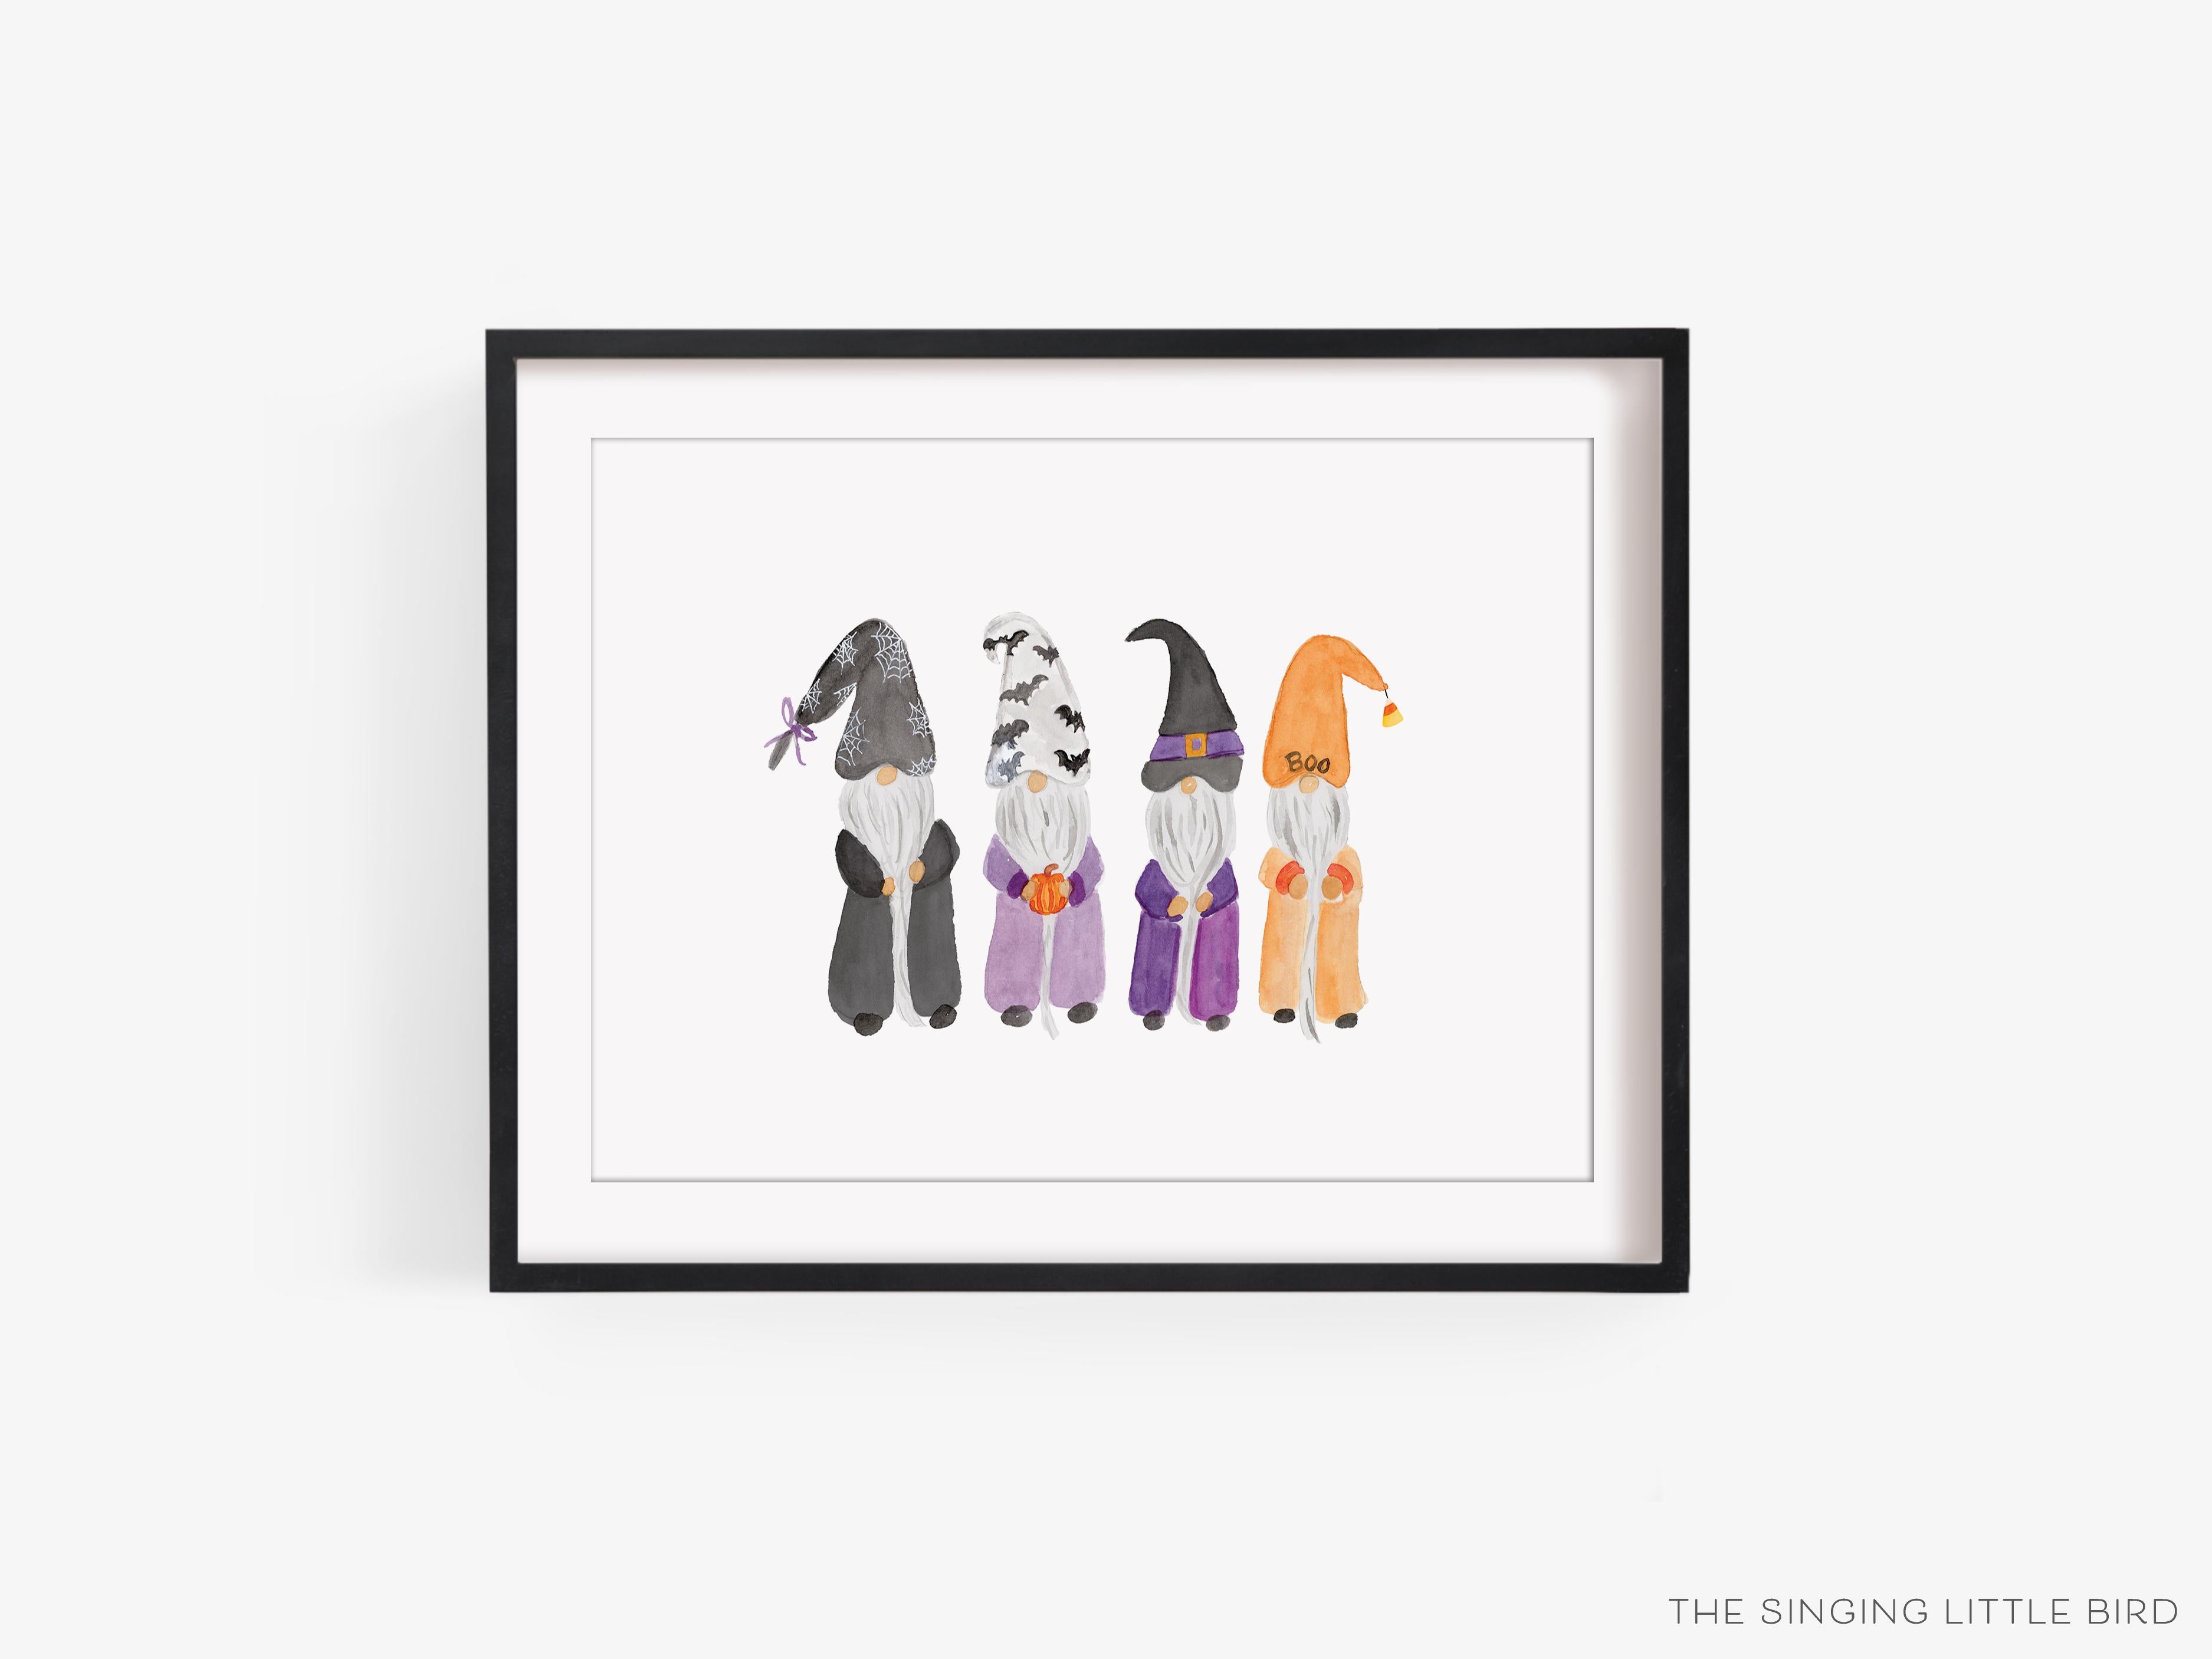 Halloween Gnome Art Print-This watercolor art print features our hand-painted Gnomes, printed in the USA on 120lb high quality art paper. This makes a great gift or wall decor for the gnome lover in your life.-The Singing Little Bird